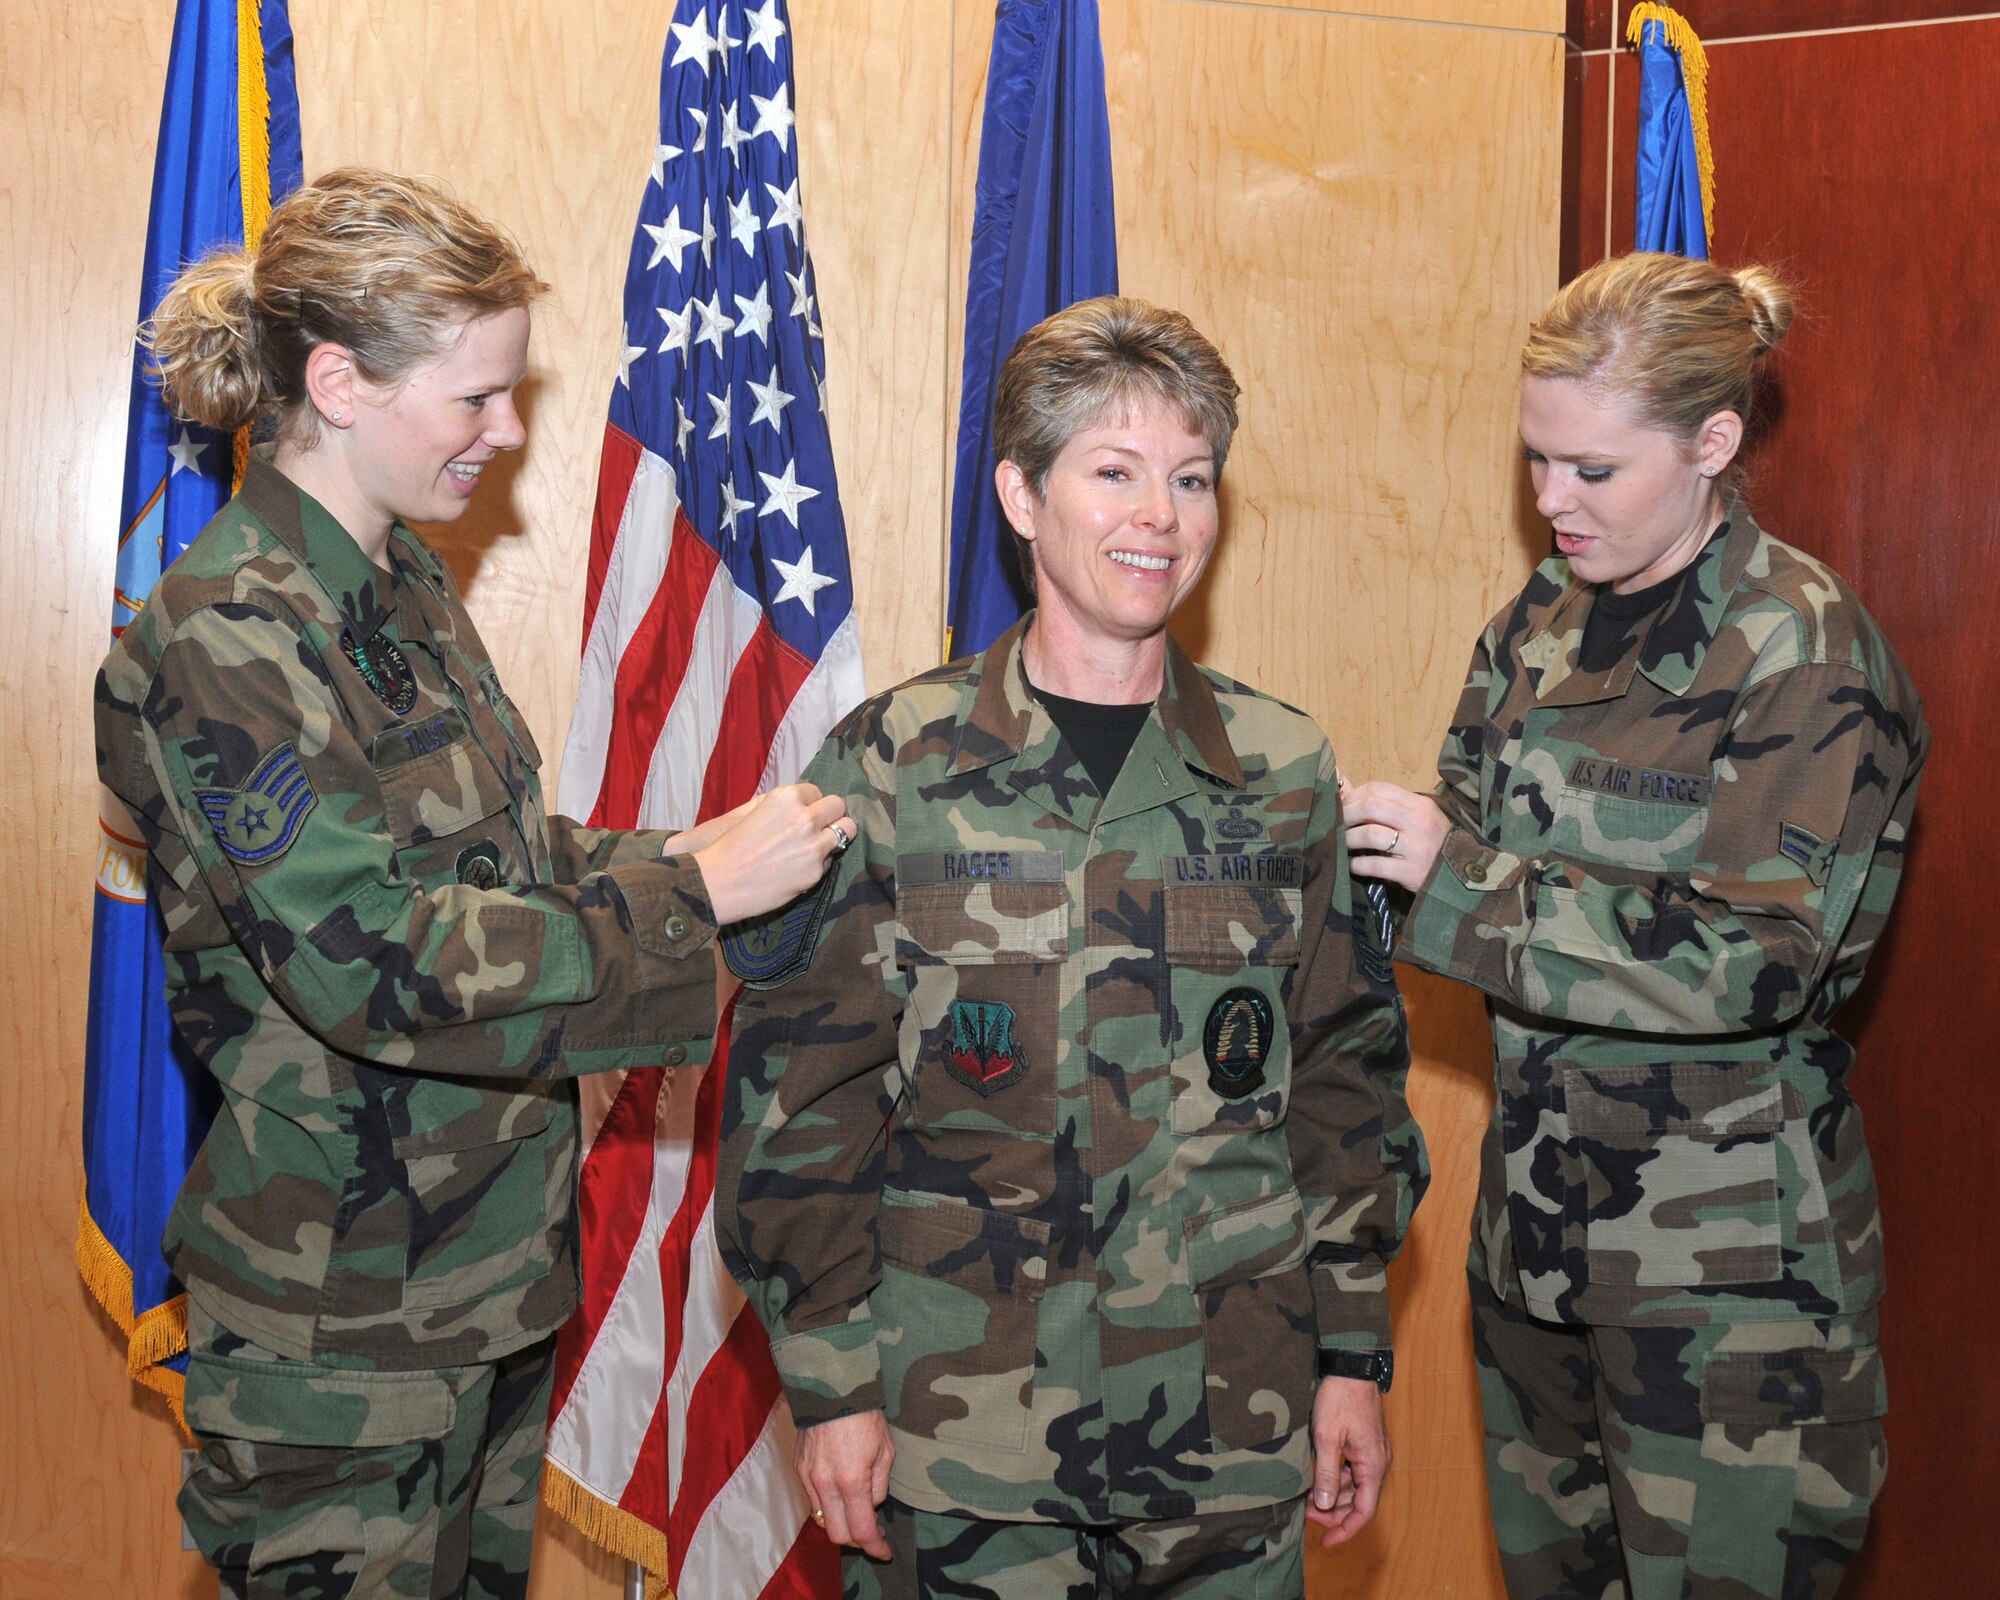 Staff Sergeant Erin B Nielsen and Airman First Class Ainslee E Rager-McIlwaine perform the pinning of her new rank of Chief Master First Sergeant stripes on the mother SMSgt Denise M Rager.  She is the new 151st Wing First Sergeant along with being the first CMS First Sergeant of the Utah Air National Guard.  Salt Lake City, Utah. November 2, 2008
(Released) U.S. Air Force photo by: Tech. Sgt. Michael D Evans
